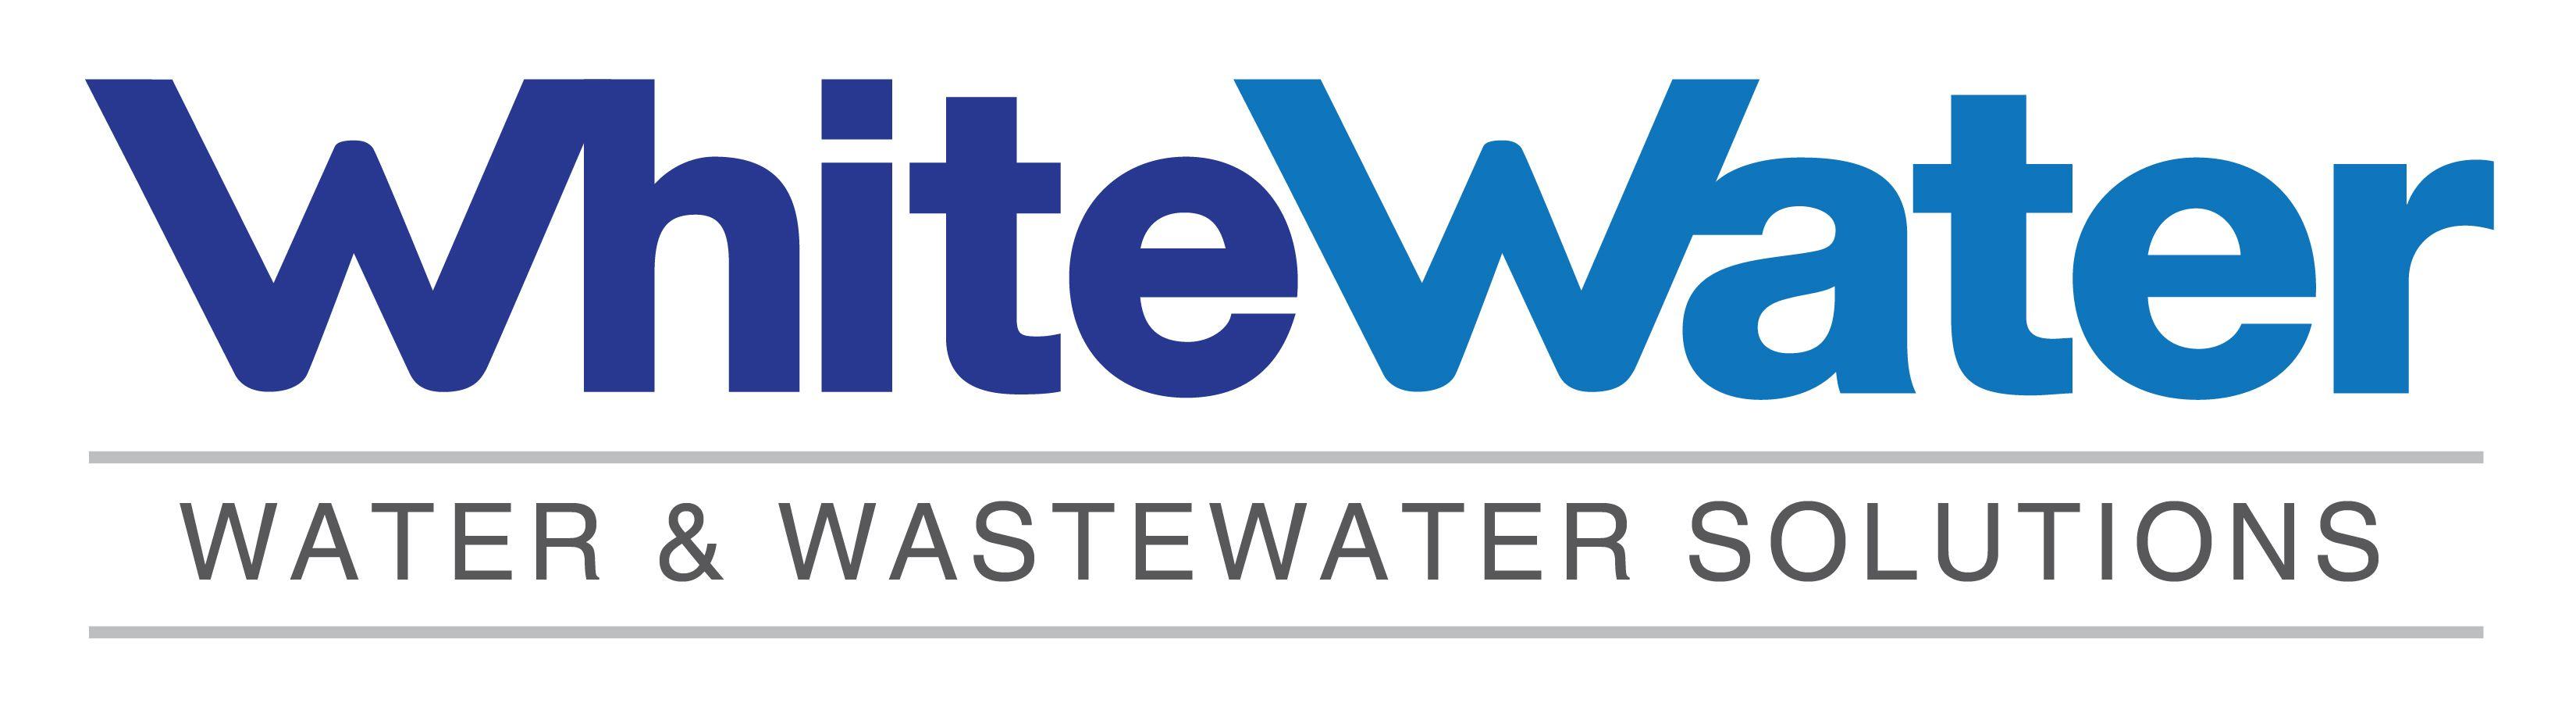 Whitewater Company Logo - WhiteWater Water & Wastewater Solutions